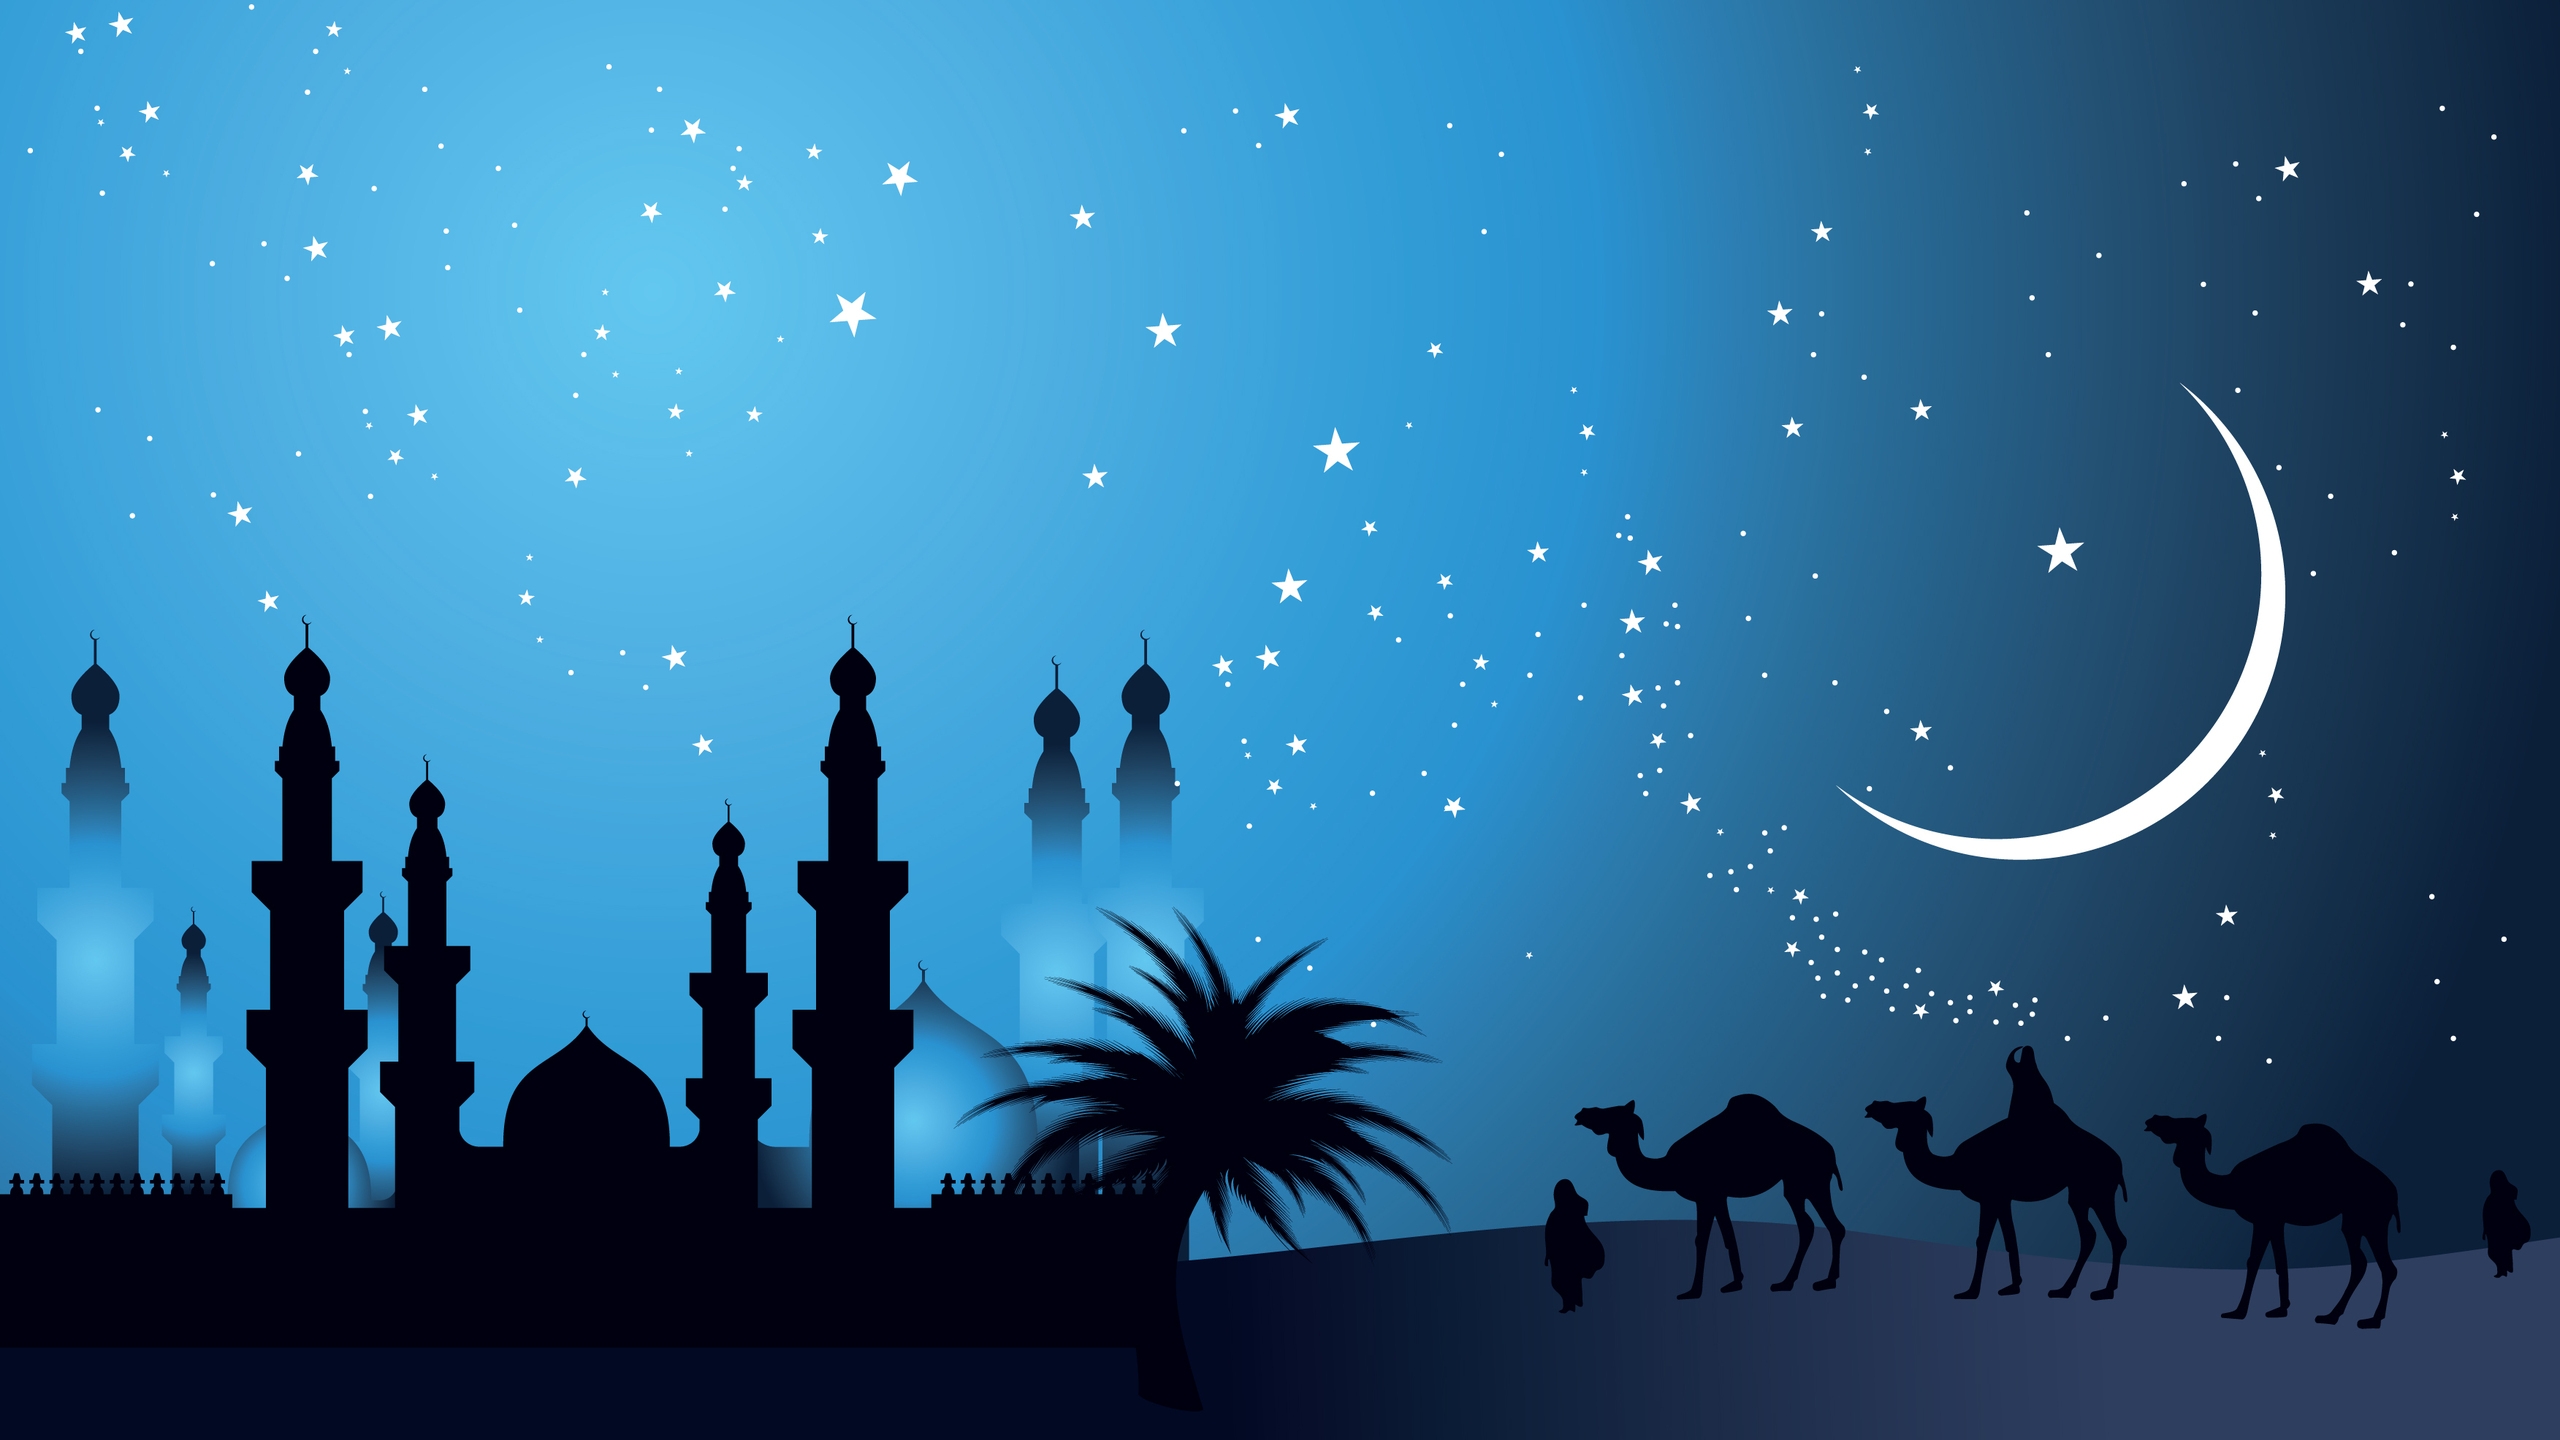 Camels in The Night for 2560x1440 HDTV resolution